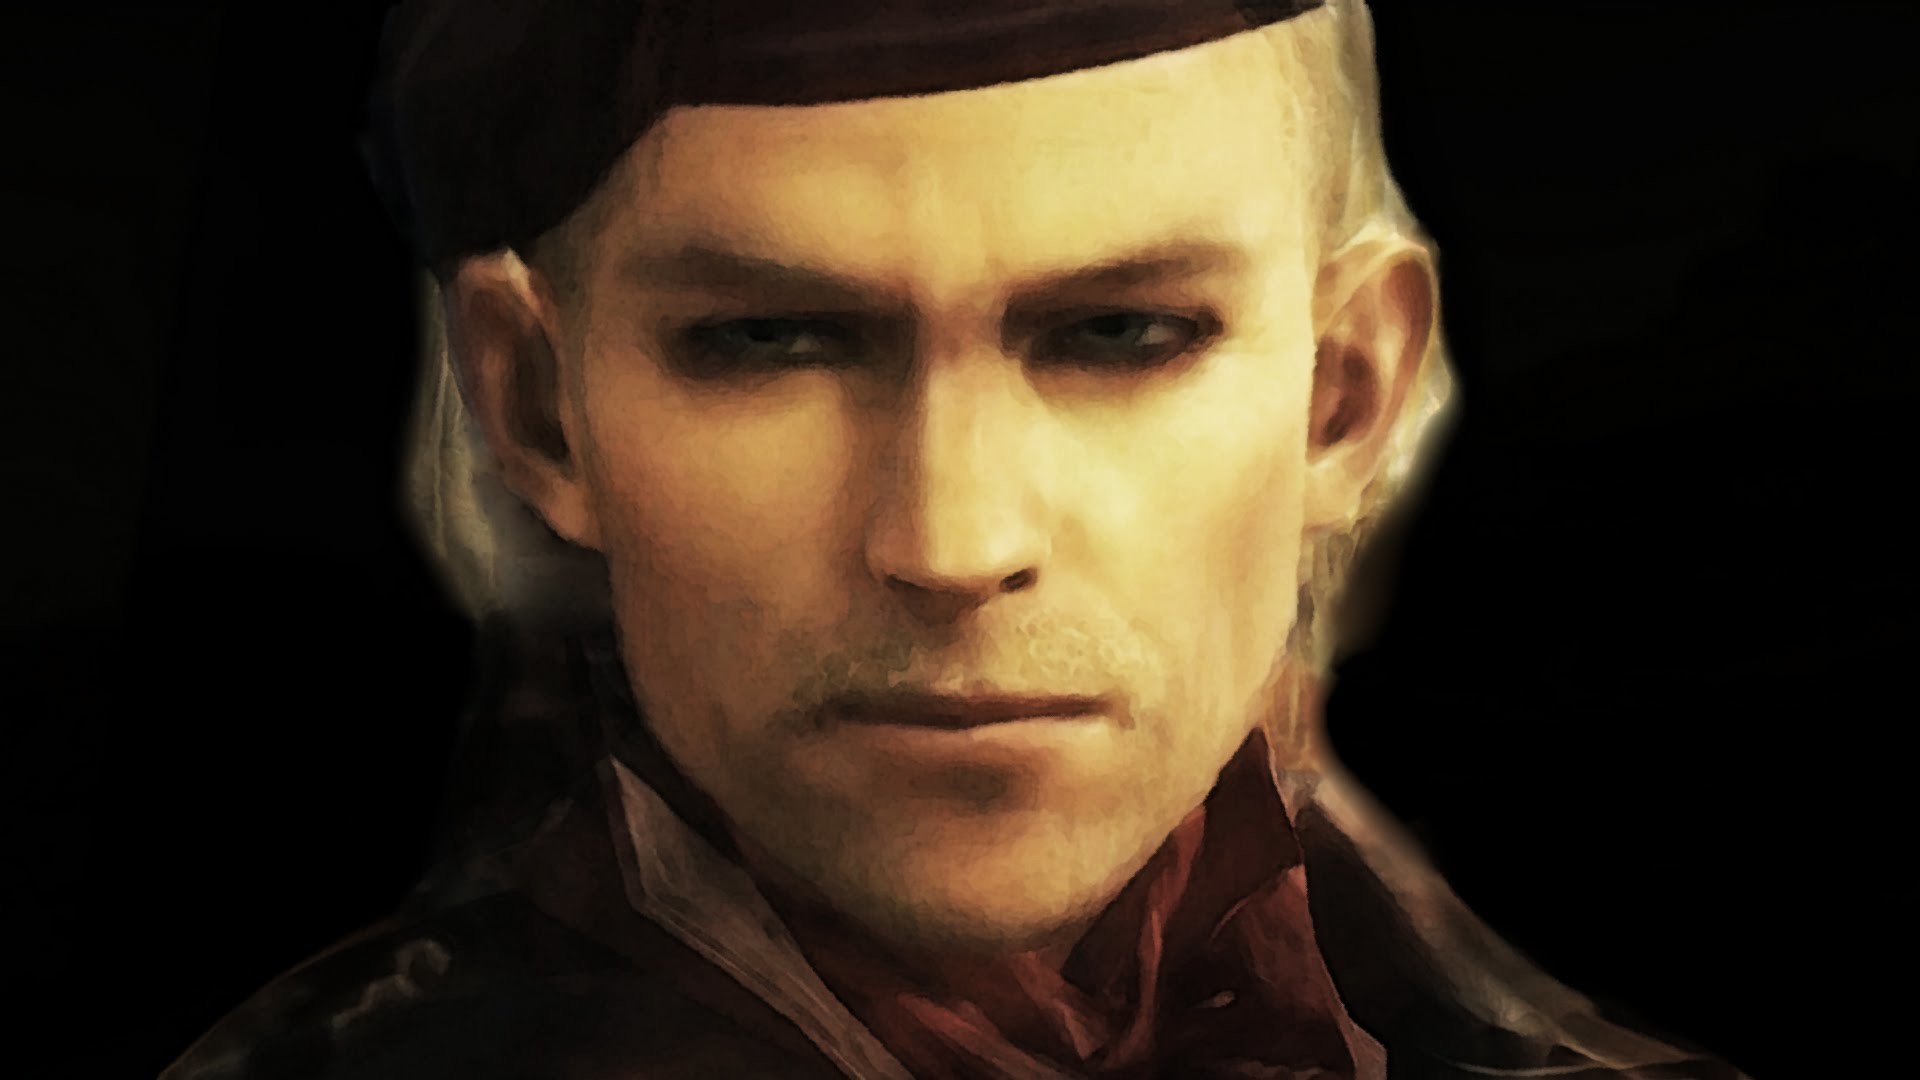 1920x1080 Metal Gear Solid Series: An Ocelot Through The Years. (Face-Morph effect)